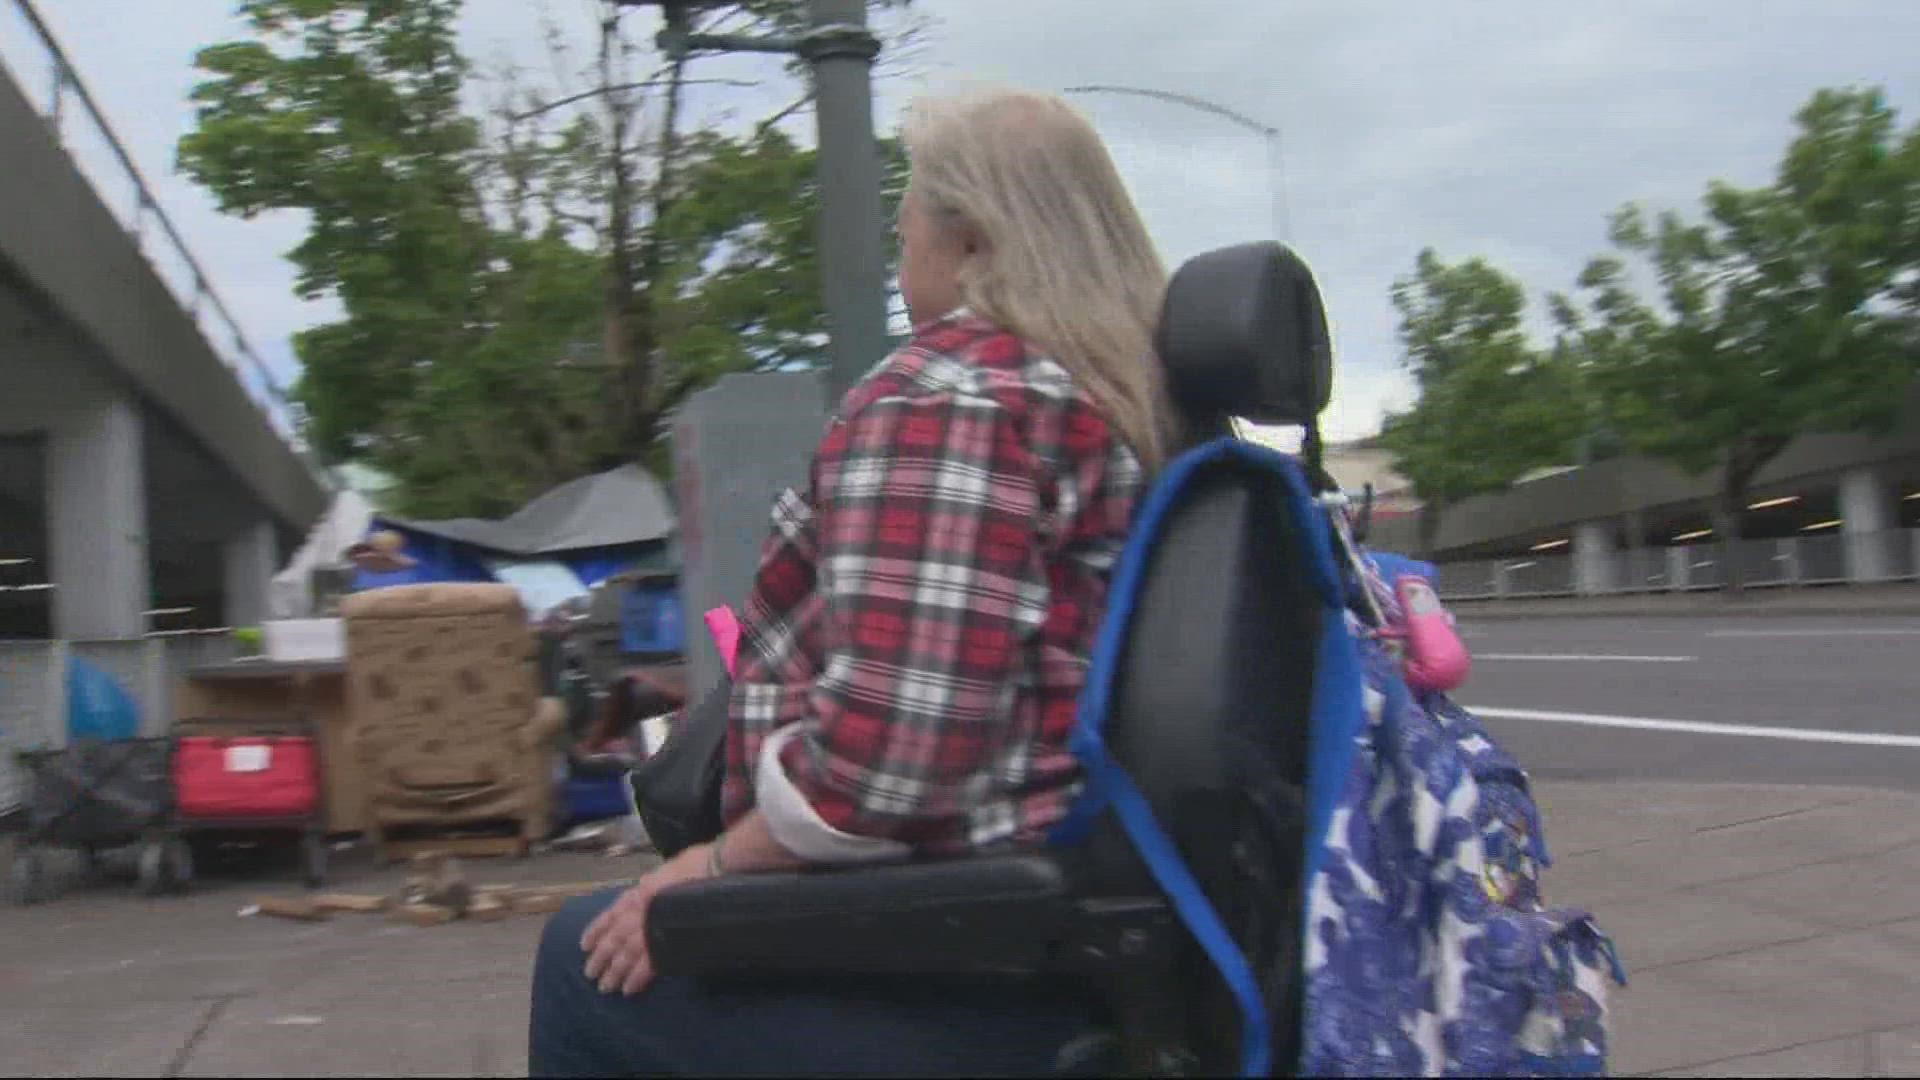 People who use wheelchairs say tents and piles of garbage are preventing them from accessing city sidewalks.